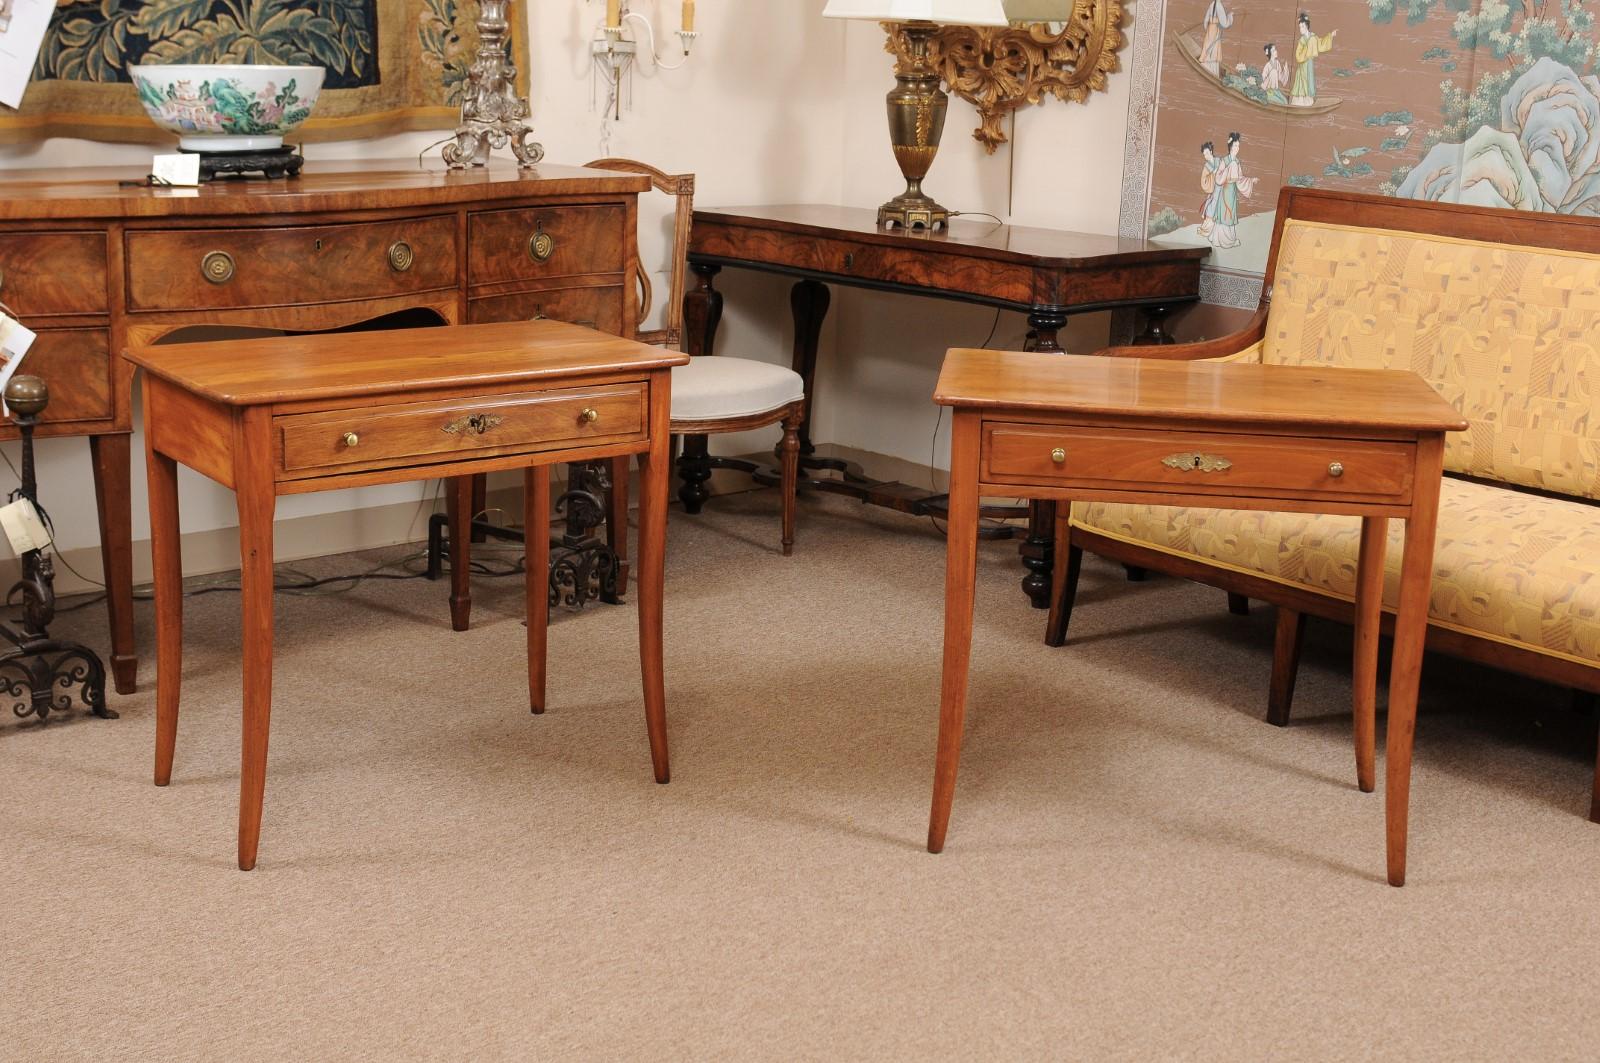 A pair Biedermeier style fruitwood side tables with drawer in frieze with brass pulls and tapered splayed legs. The tables dating from the late 19th century.